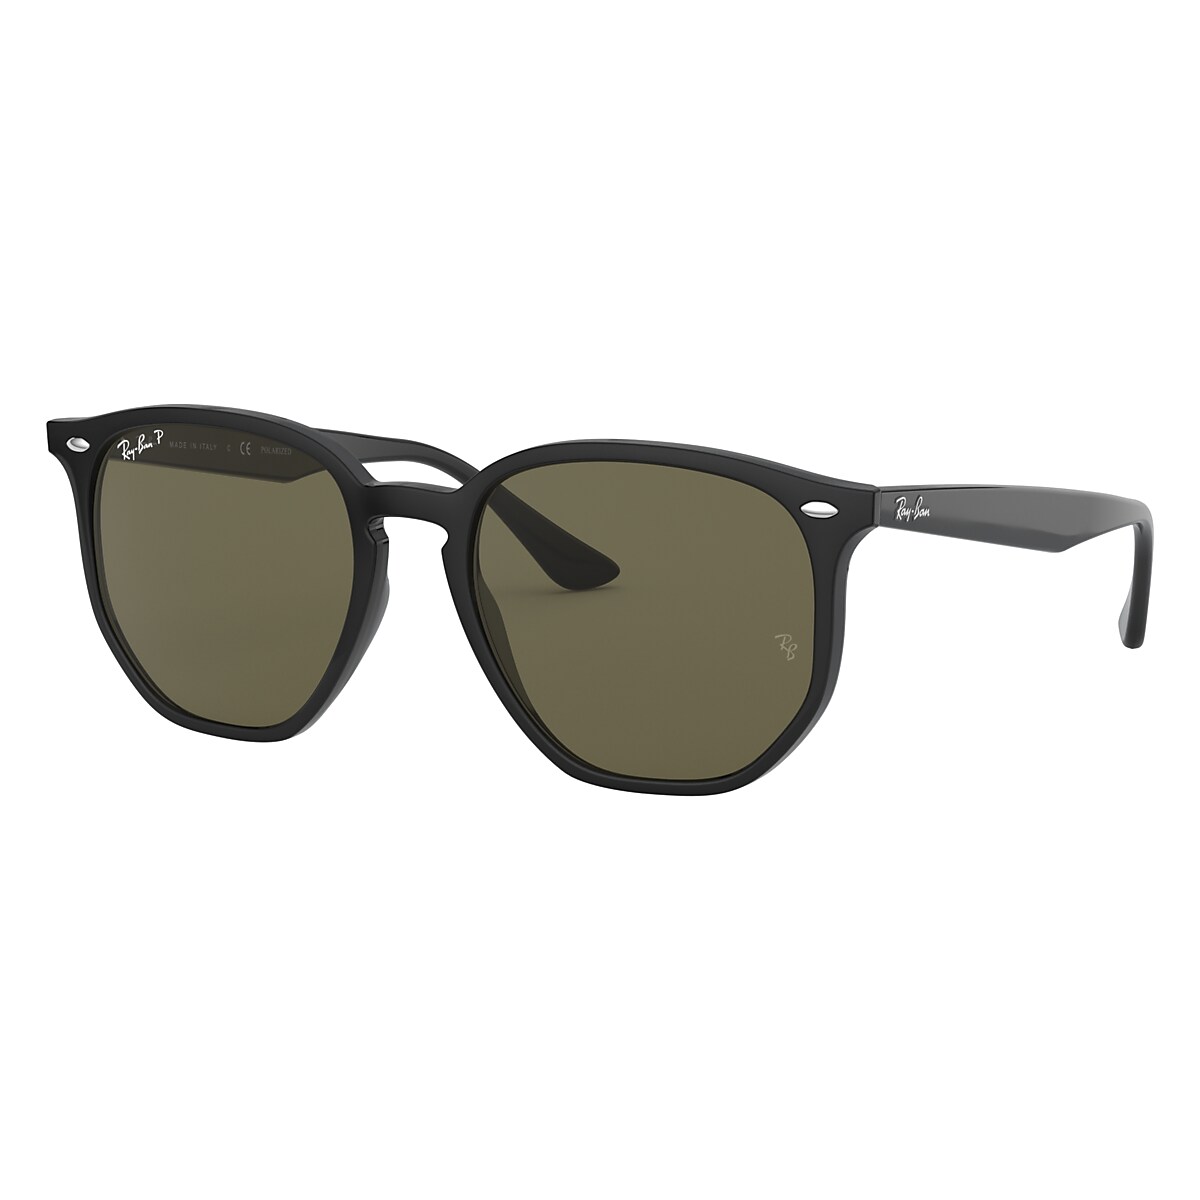 RB4306 Sunglasses in Black and Green - RB4306 | Ray-Ban® US